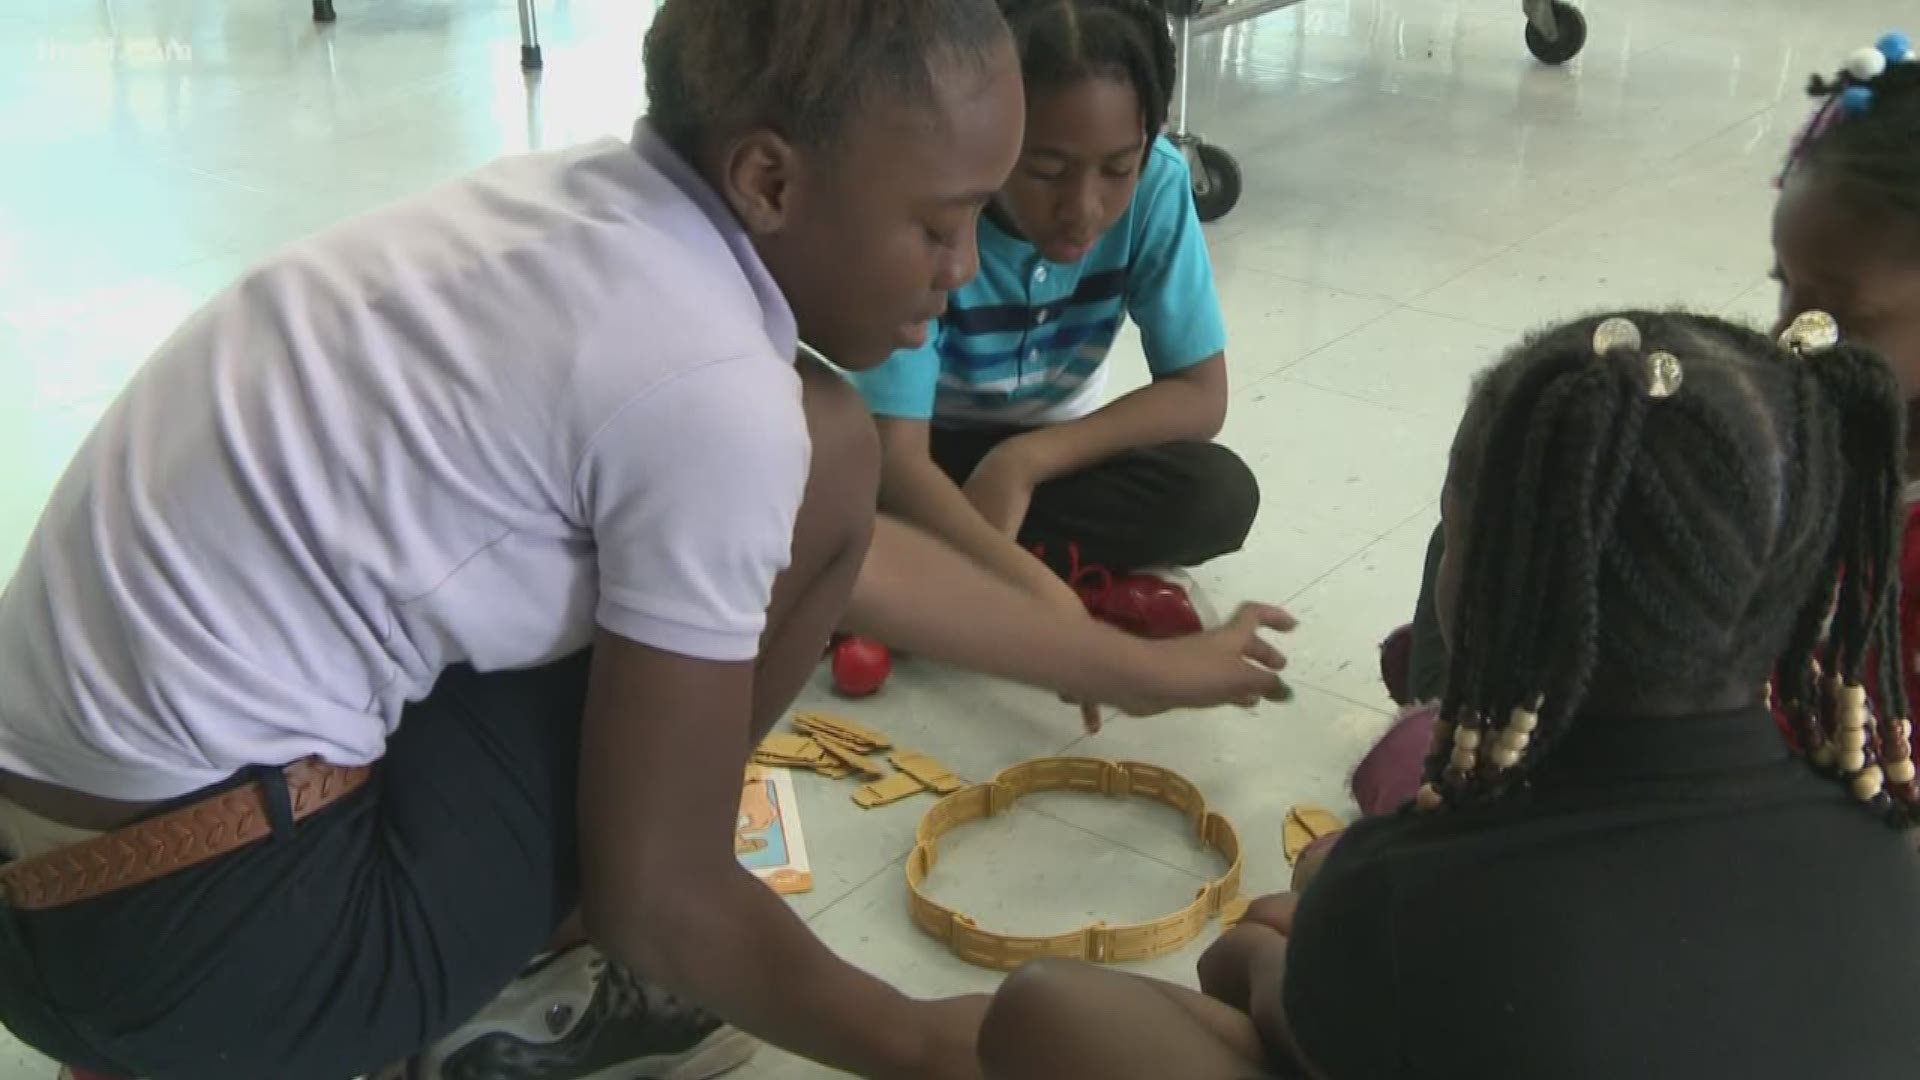 Students at Brady Elementary are making friends in the name of science, thanks to one creative project.